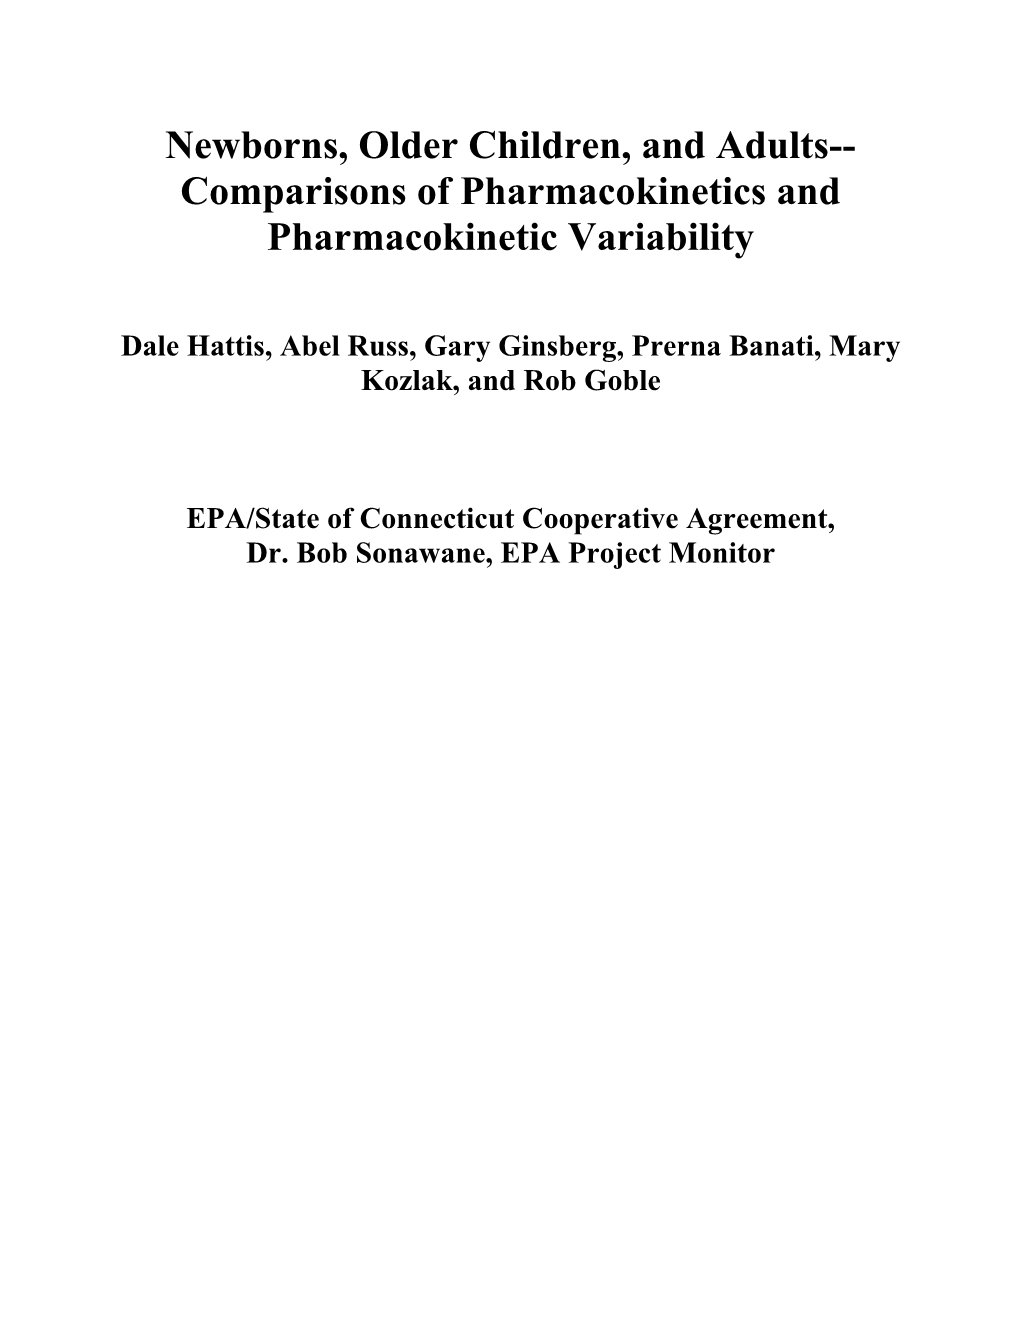 Newborns, Older Children, and Adults Comparisons of Pharmacokinetics and Pharmacokinetic